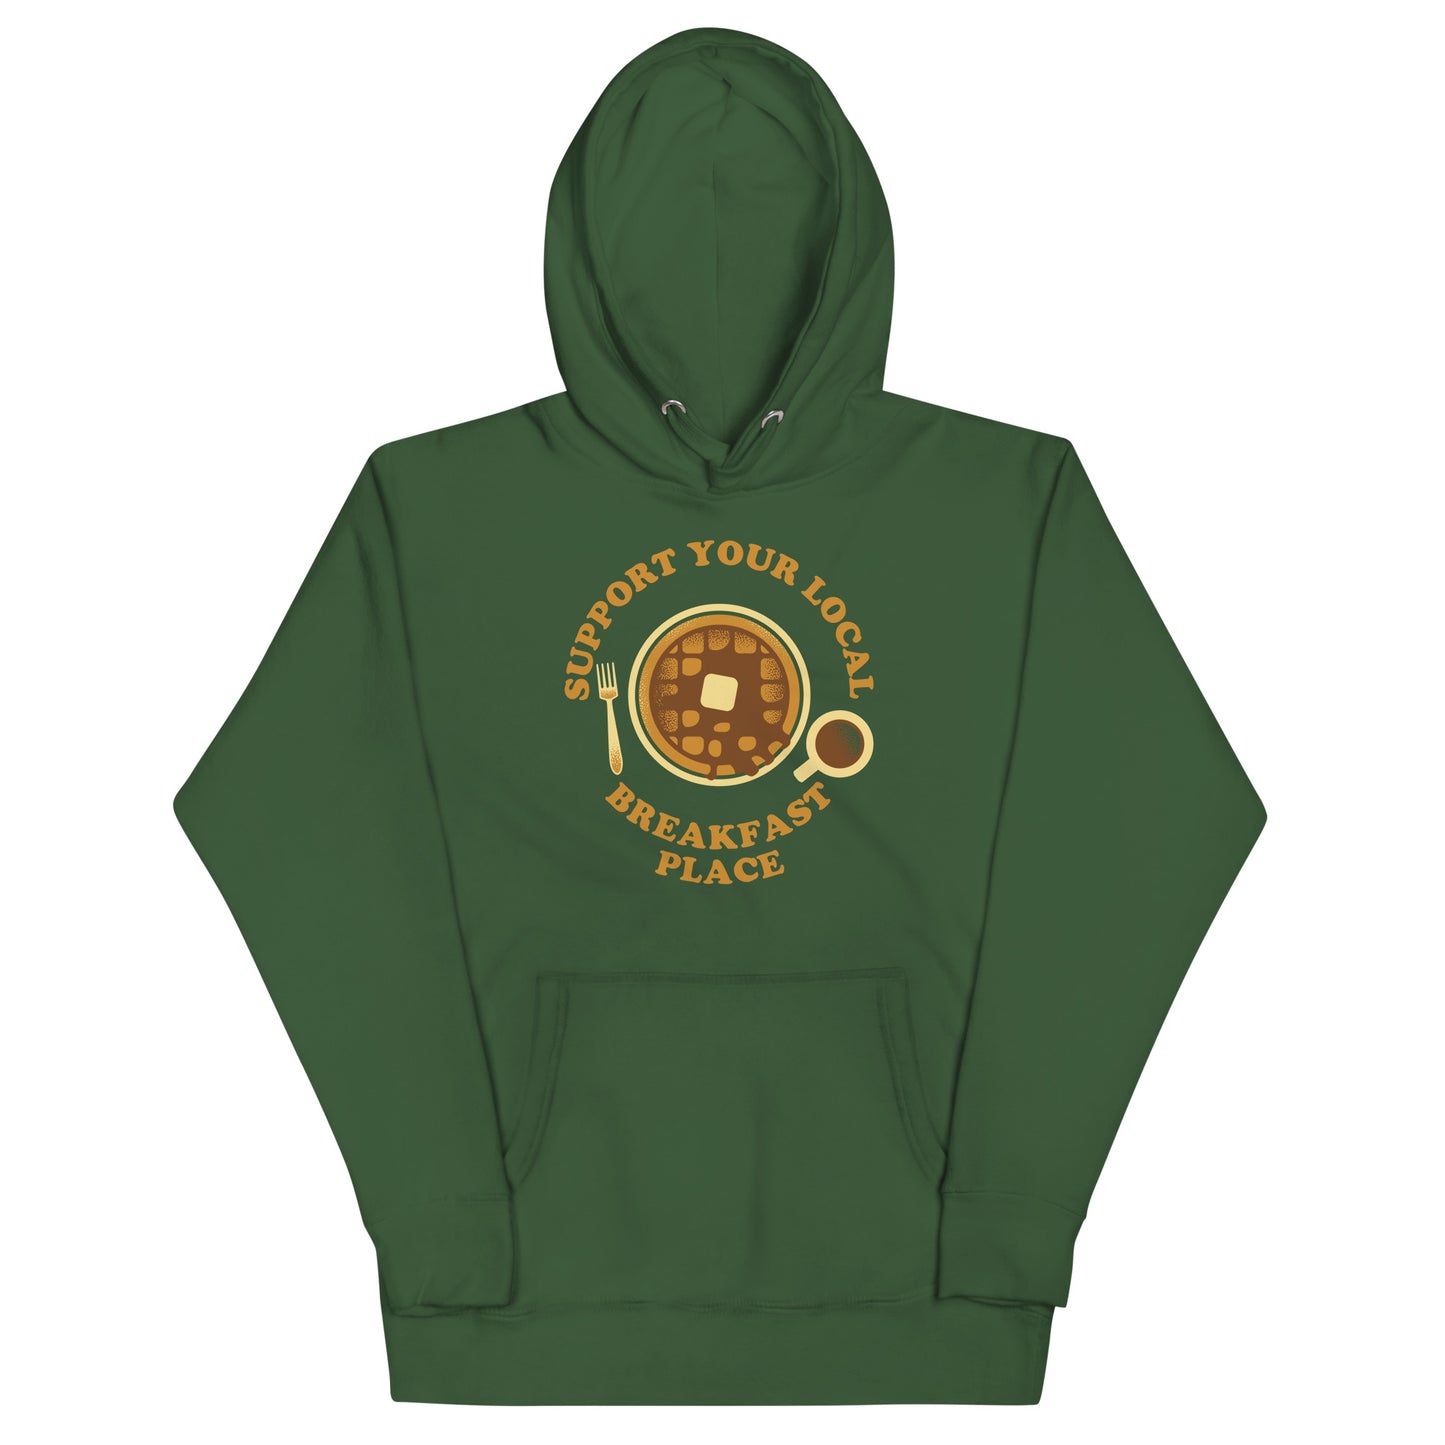 Support Your Local Breakfast Place Unisex Hoodie